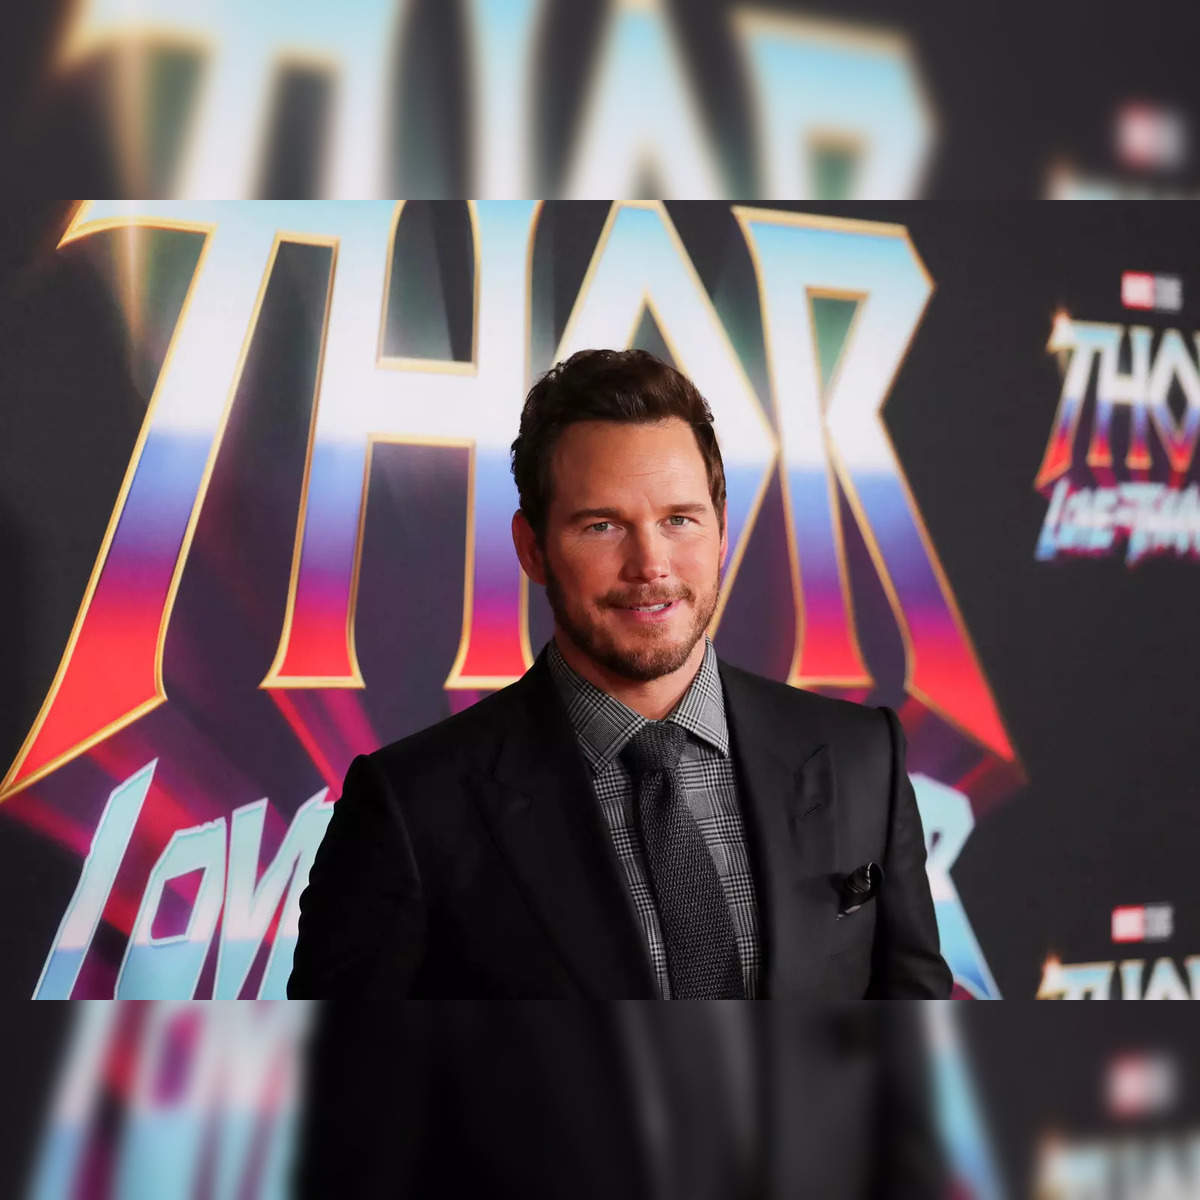 Chris Pratt says his wife is very, very excited about his Super